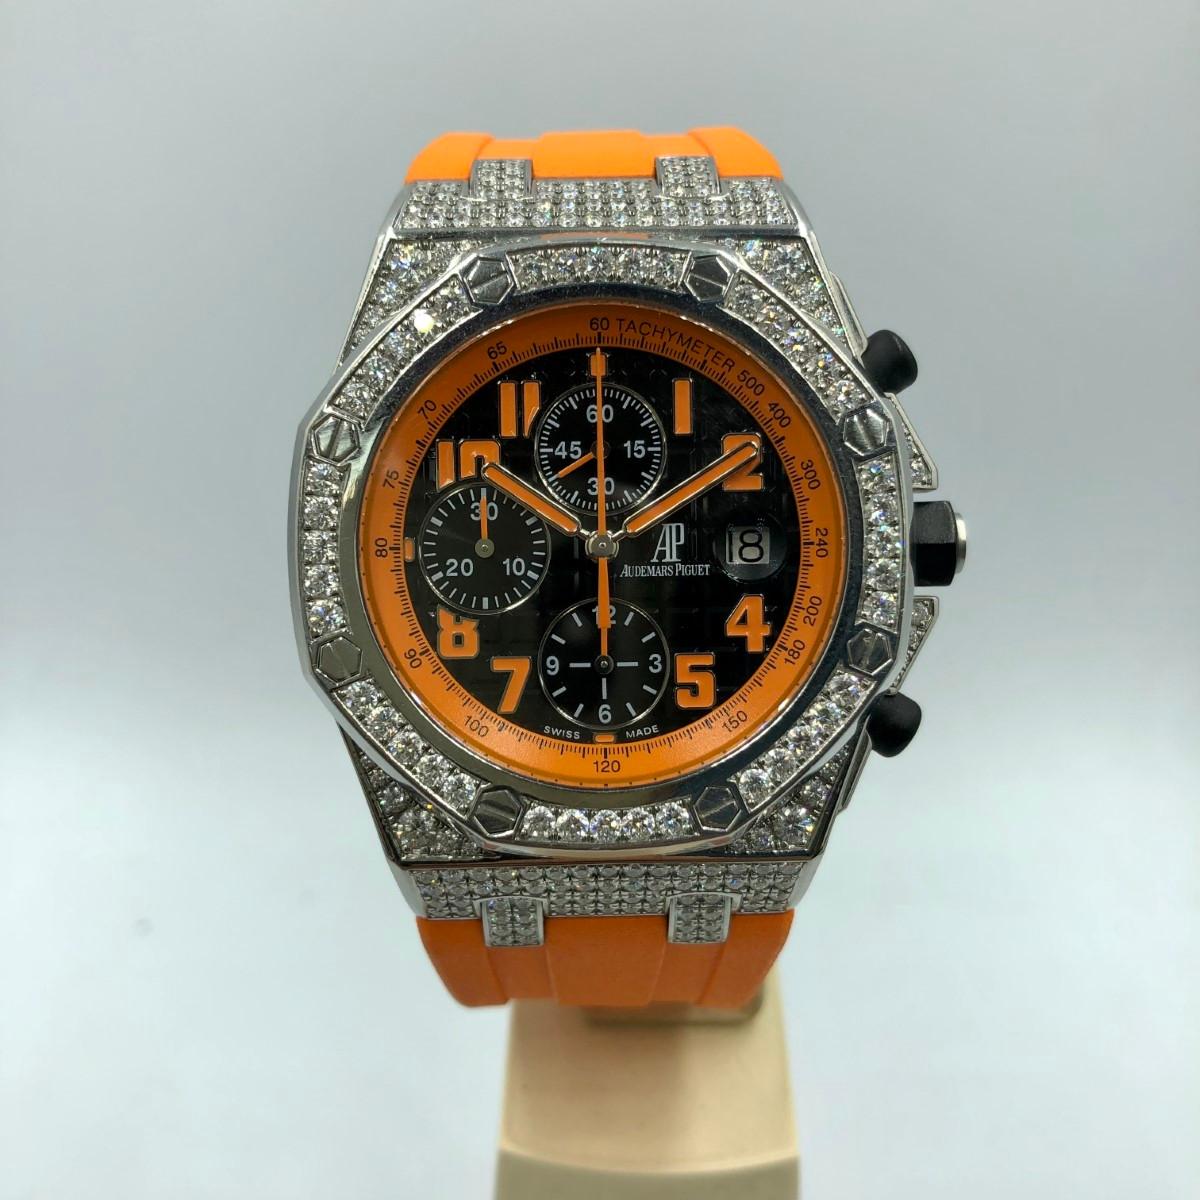 This Audemars Piguet Diamond Watch features Custom large round cut diamonds set in the brilliant bezel.  Diamonds continue on the sides of the case. 

Made in Stainless Steel with Diamonds, this Automatic Audemars Piguet is an exclusive offer.

With